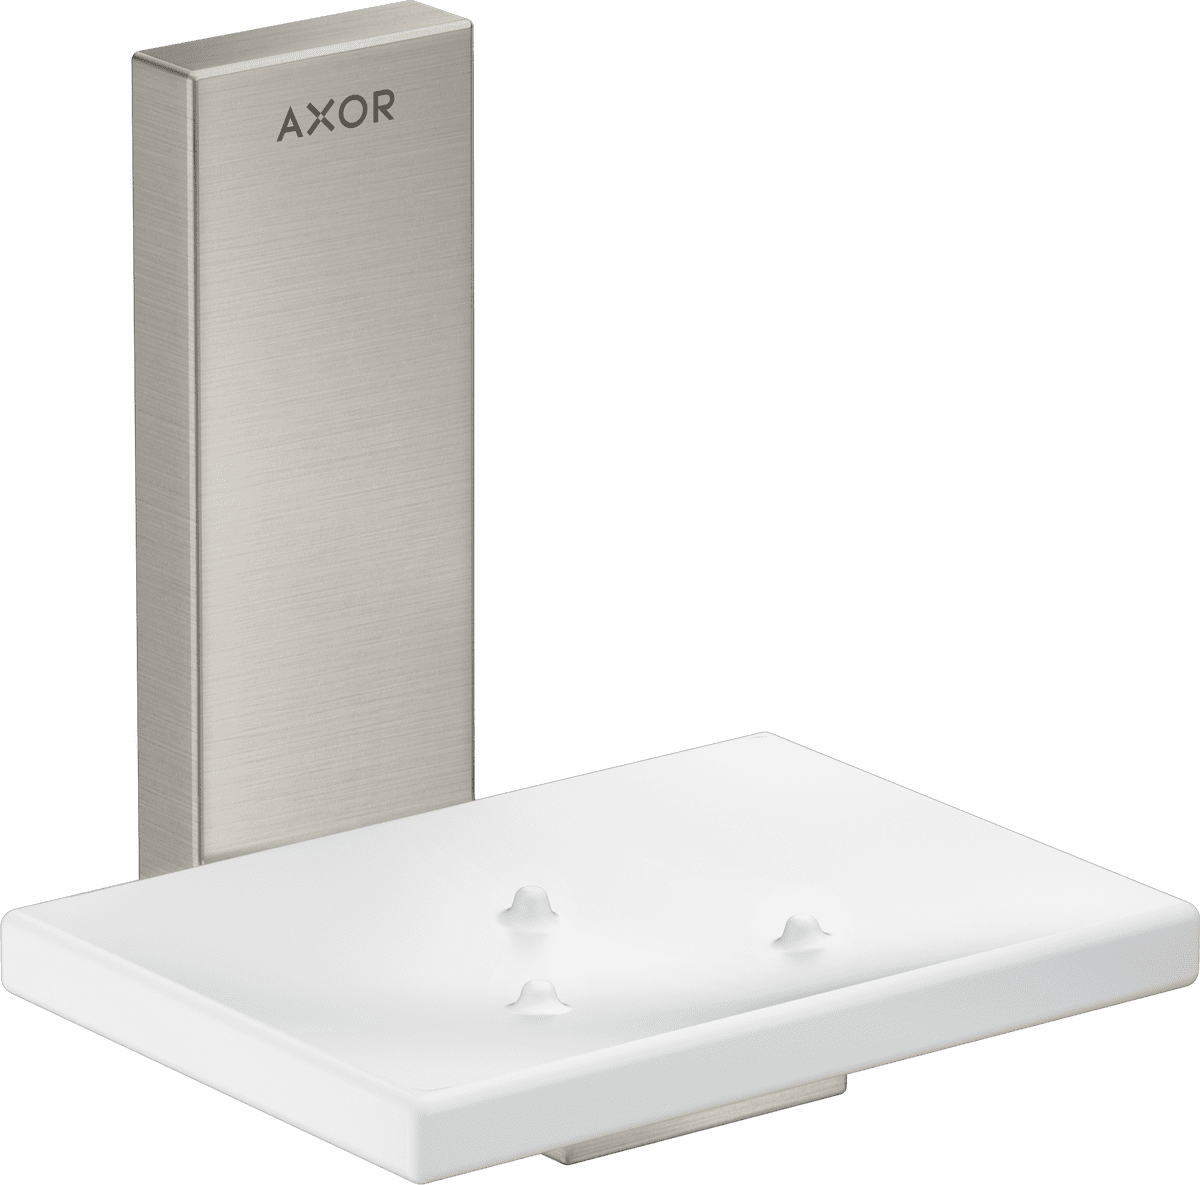 Picture of HANSGROHE AXOR Universal Rectangular Soap dish #42605800 - Stainless Steel Optic